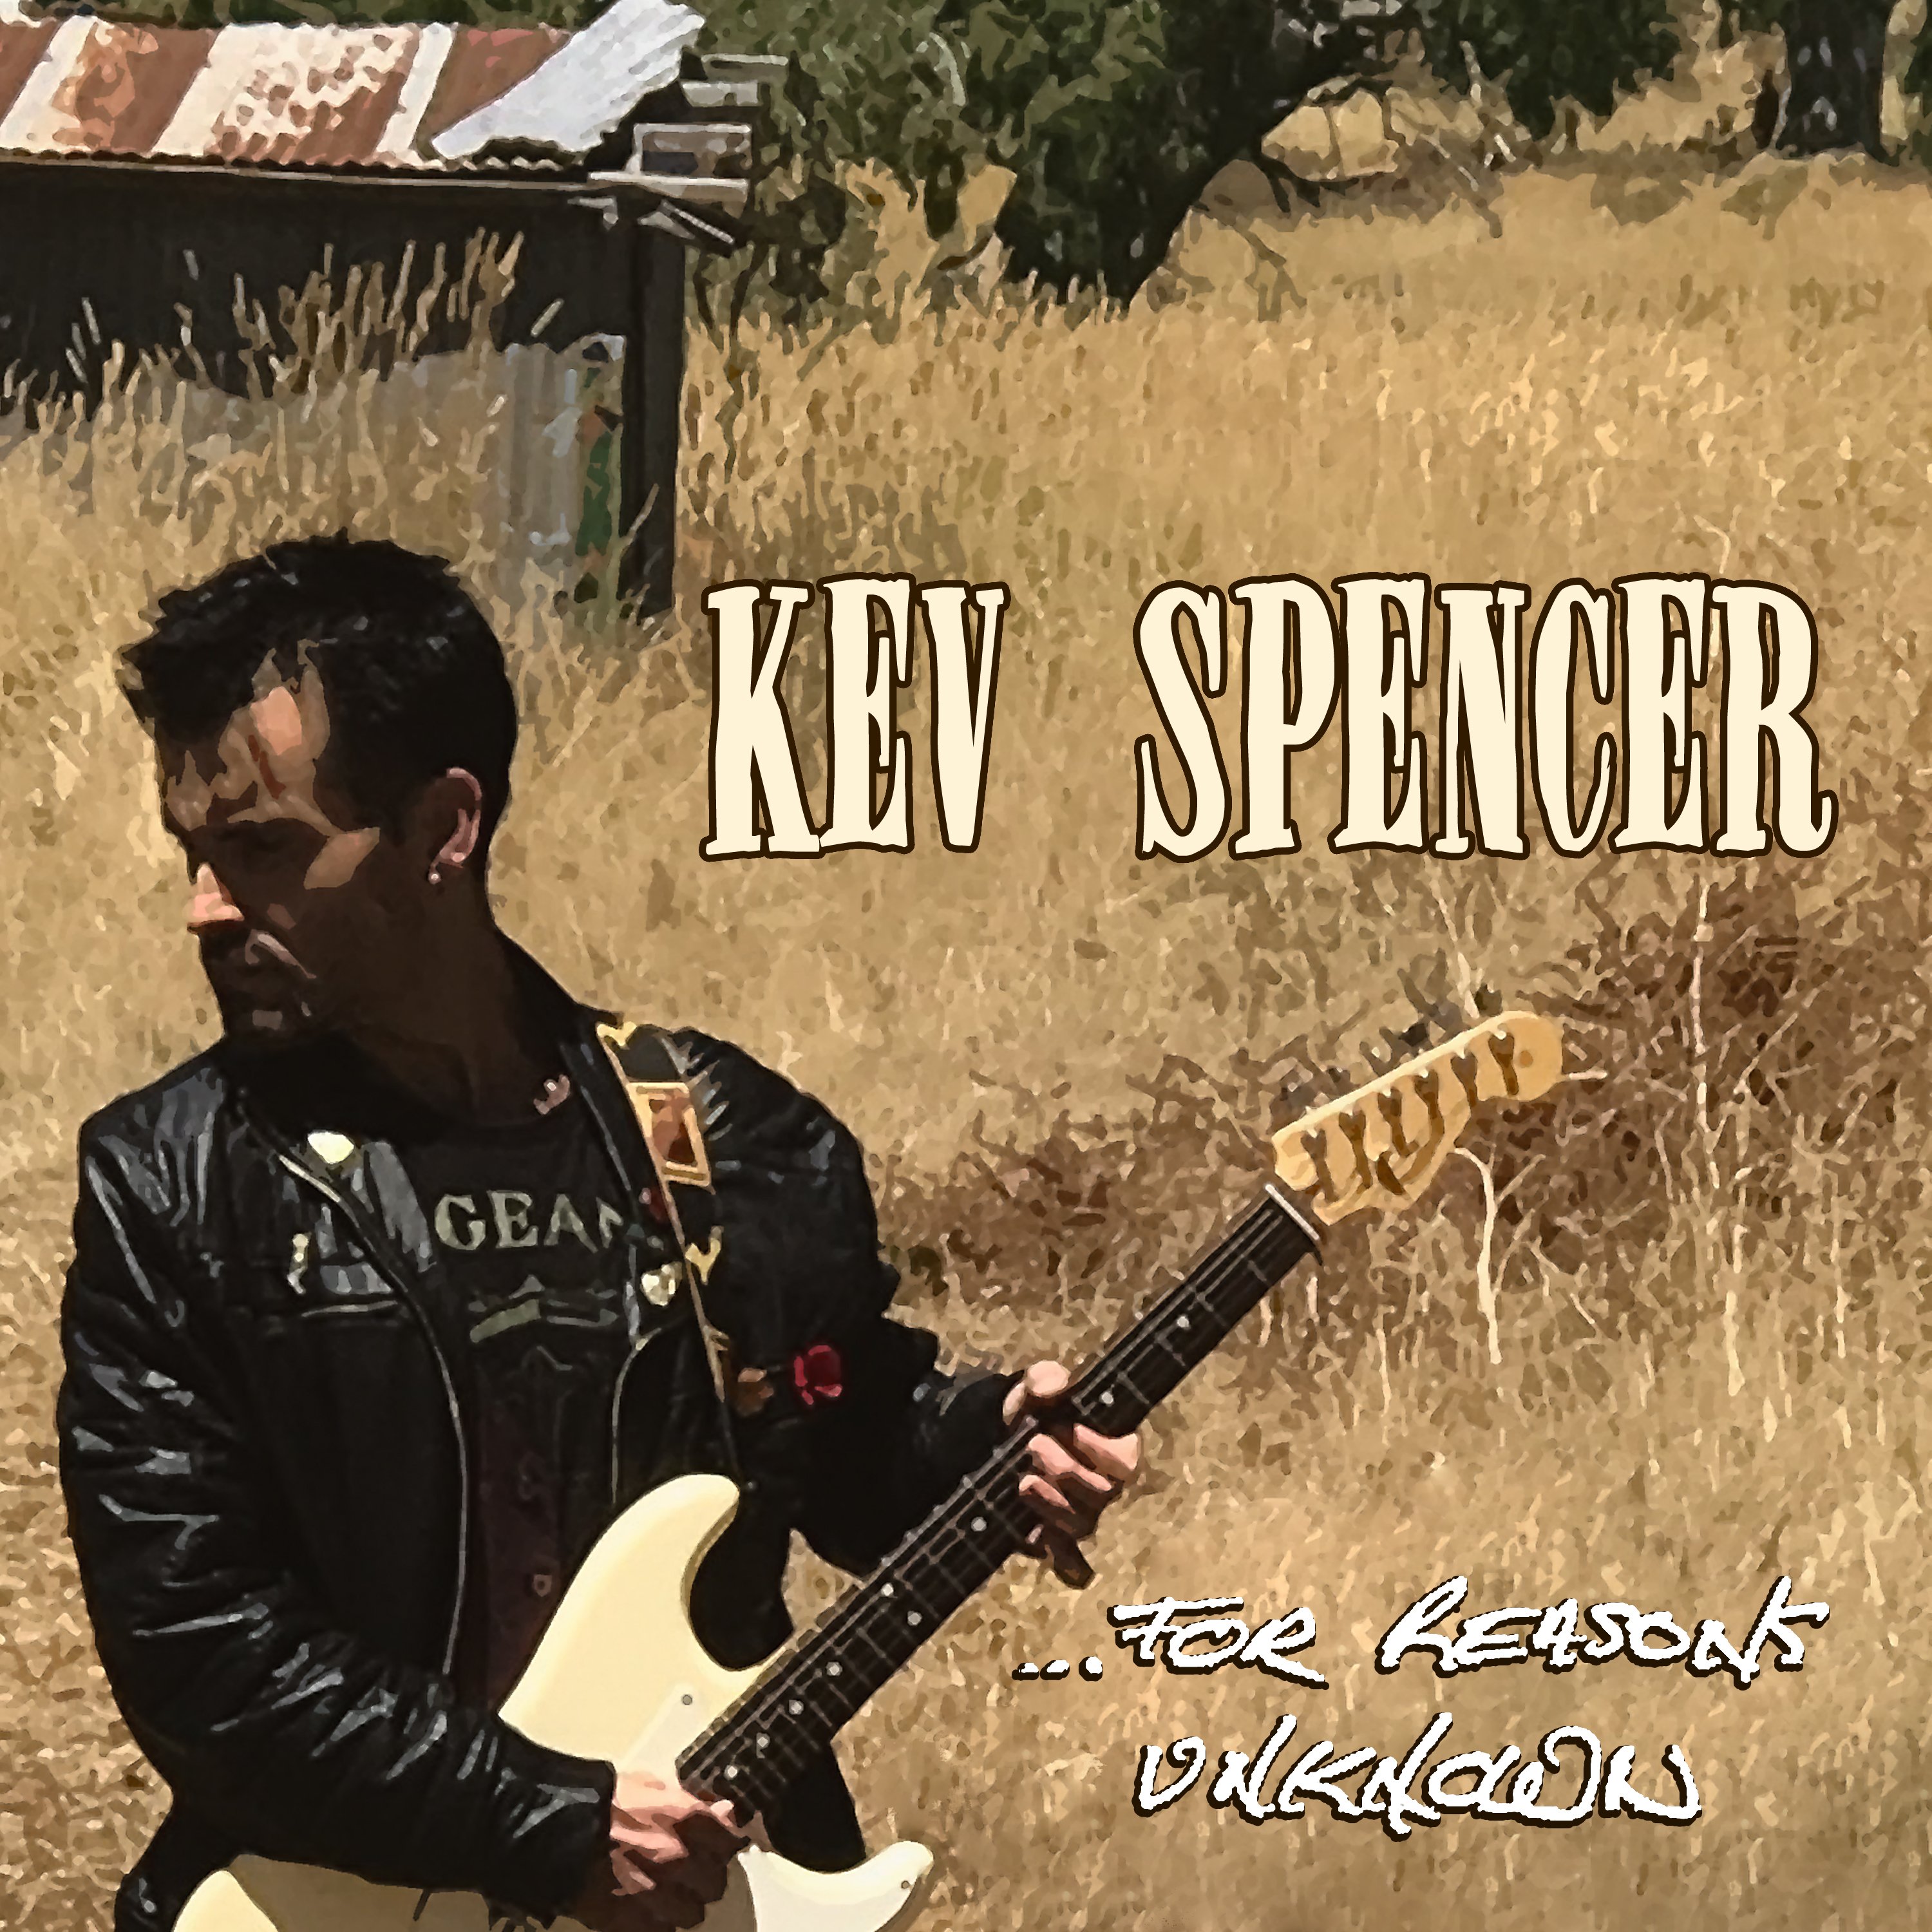 Flac 2018. Kev Spencer. Spencer КЕВ. For reasons Unknown. For reasons Unknown клип.